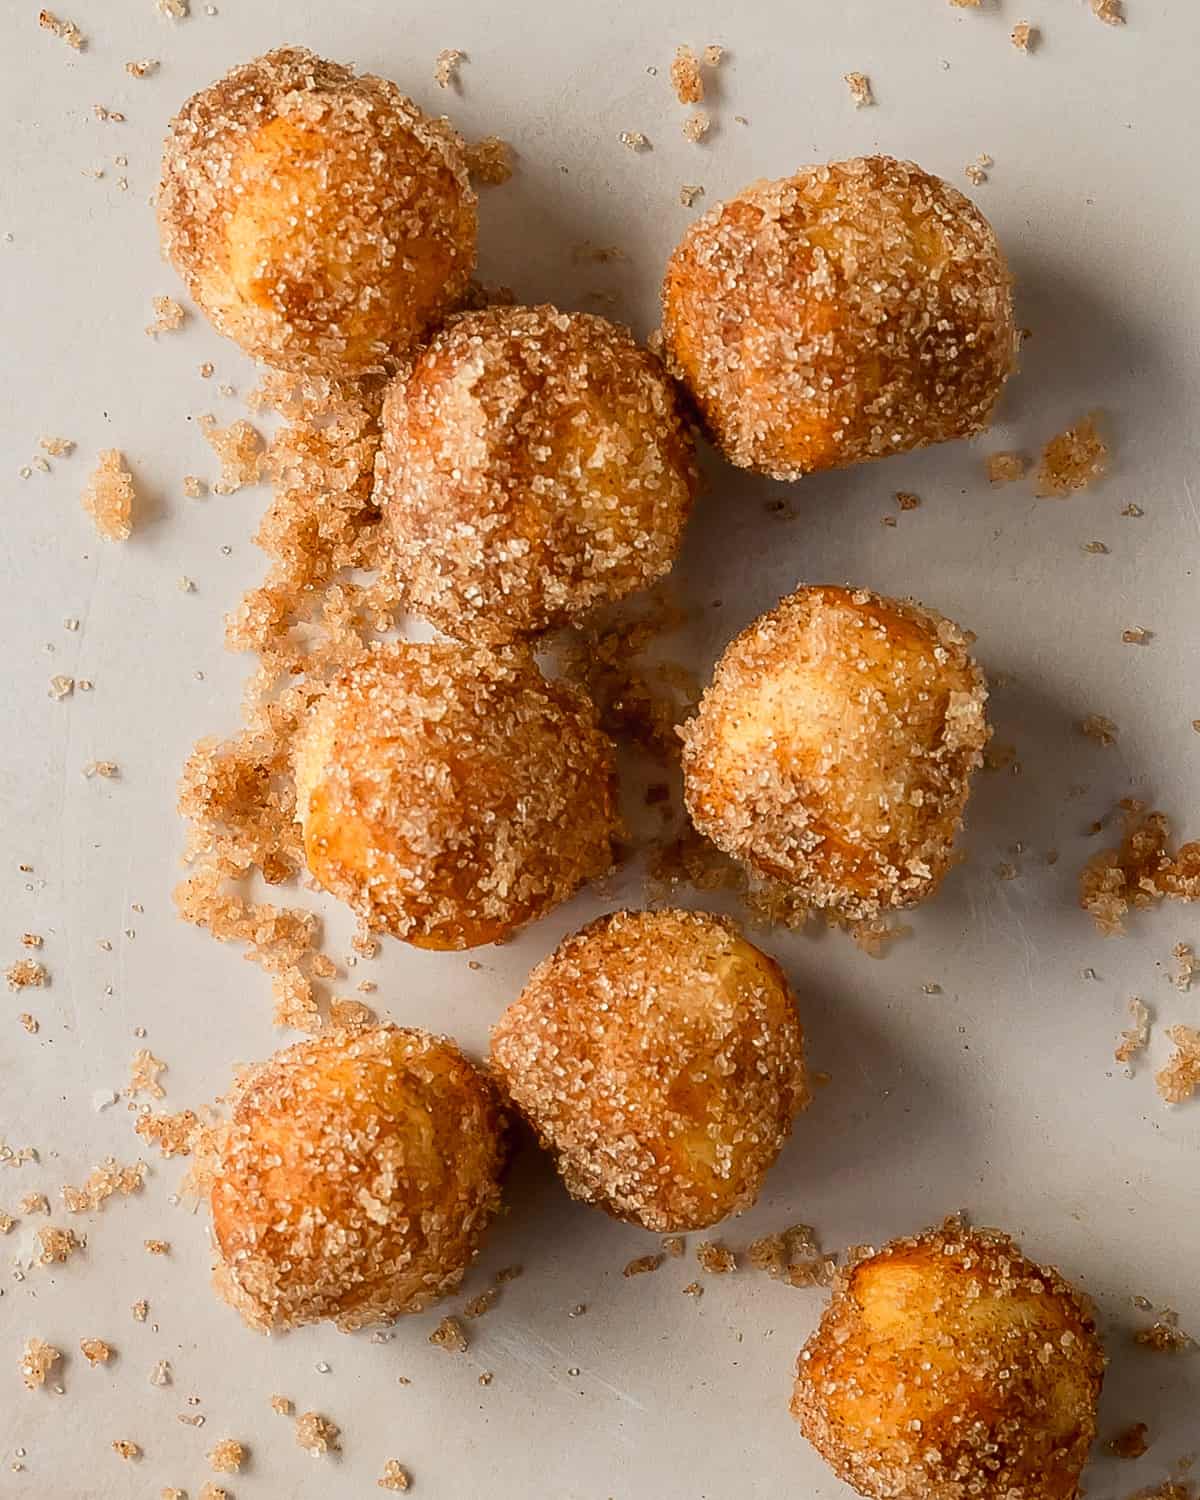 Air fryer biscuit donuts are flaky and fluffy air fryer donuts made using store bought, refrigerated biscuit dough. These easy to make biscuit doughnuts are dipped in melted butter and covered in a sweet and crunchy cinnamon sugar coating. Prep and air fryer these cinnamon sugar biscuit donuts in under 10 minutes.